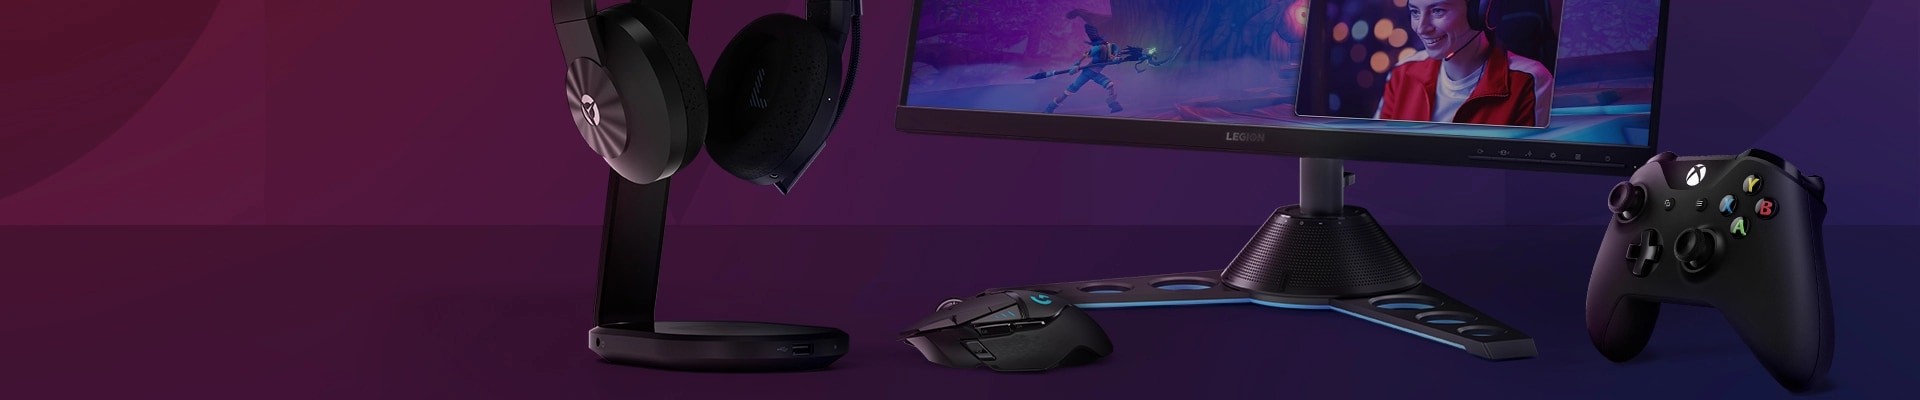 trådløs Feed på lanthan PC Gaming Accessories | Best Accessories For Gaming Setup in 2023 | Lenovo  US